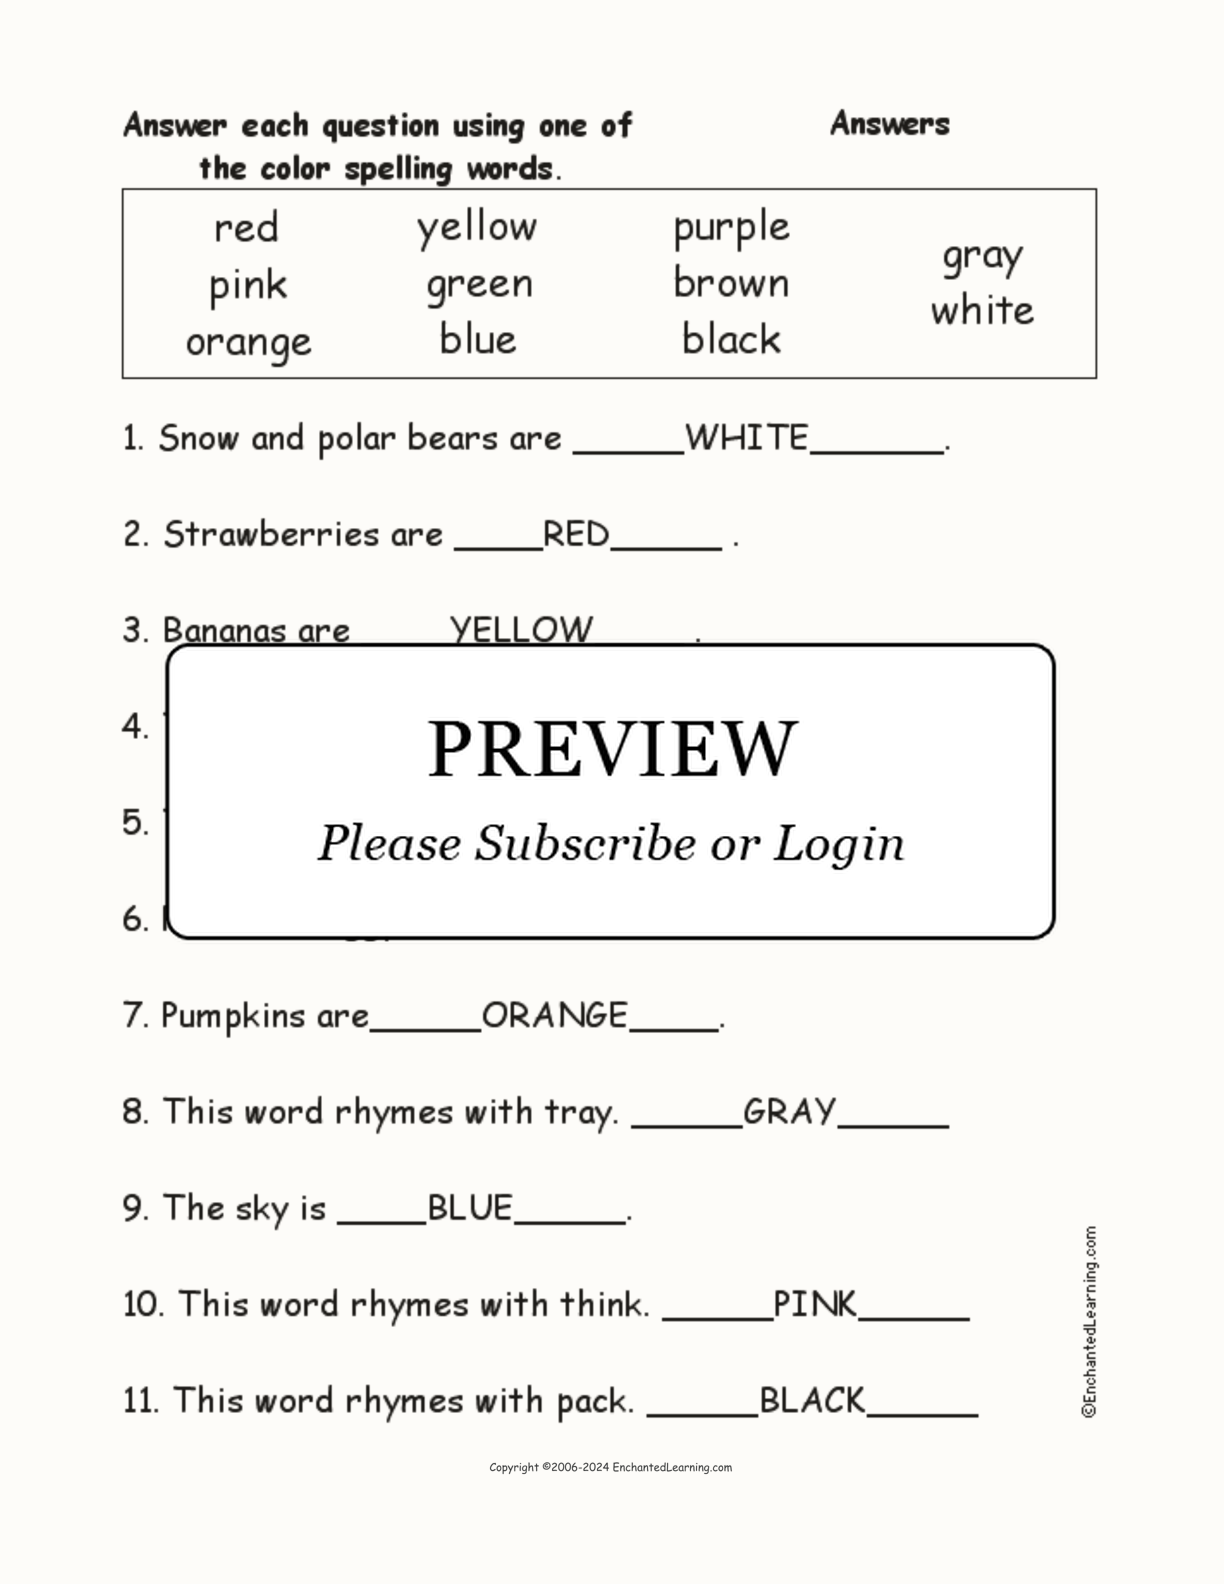 Color Spelling Word Questions interactive worksheet page 2